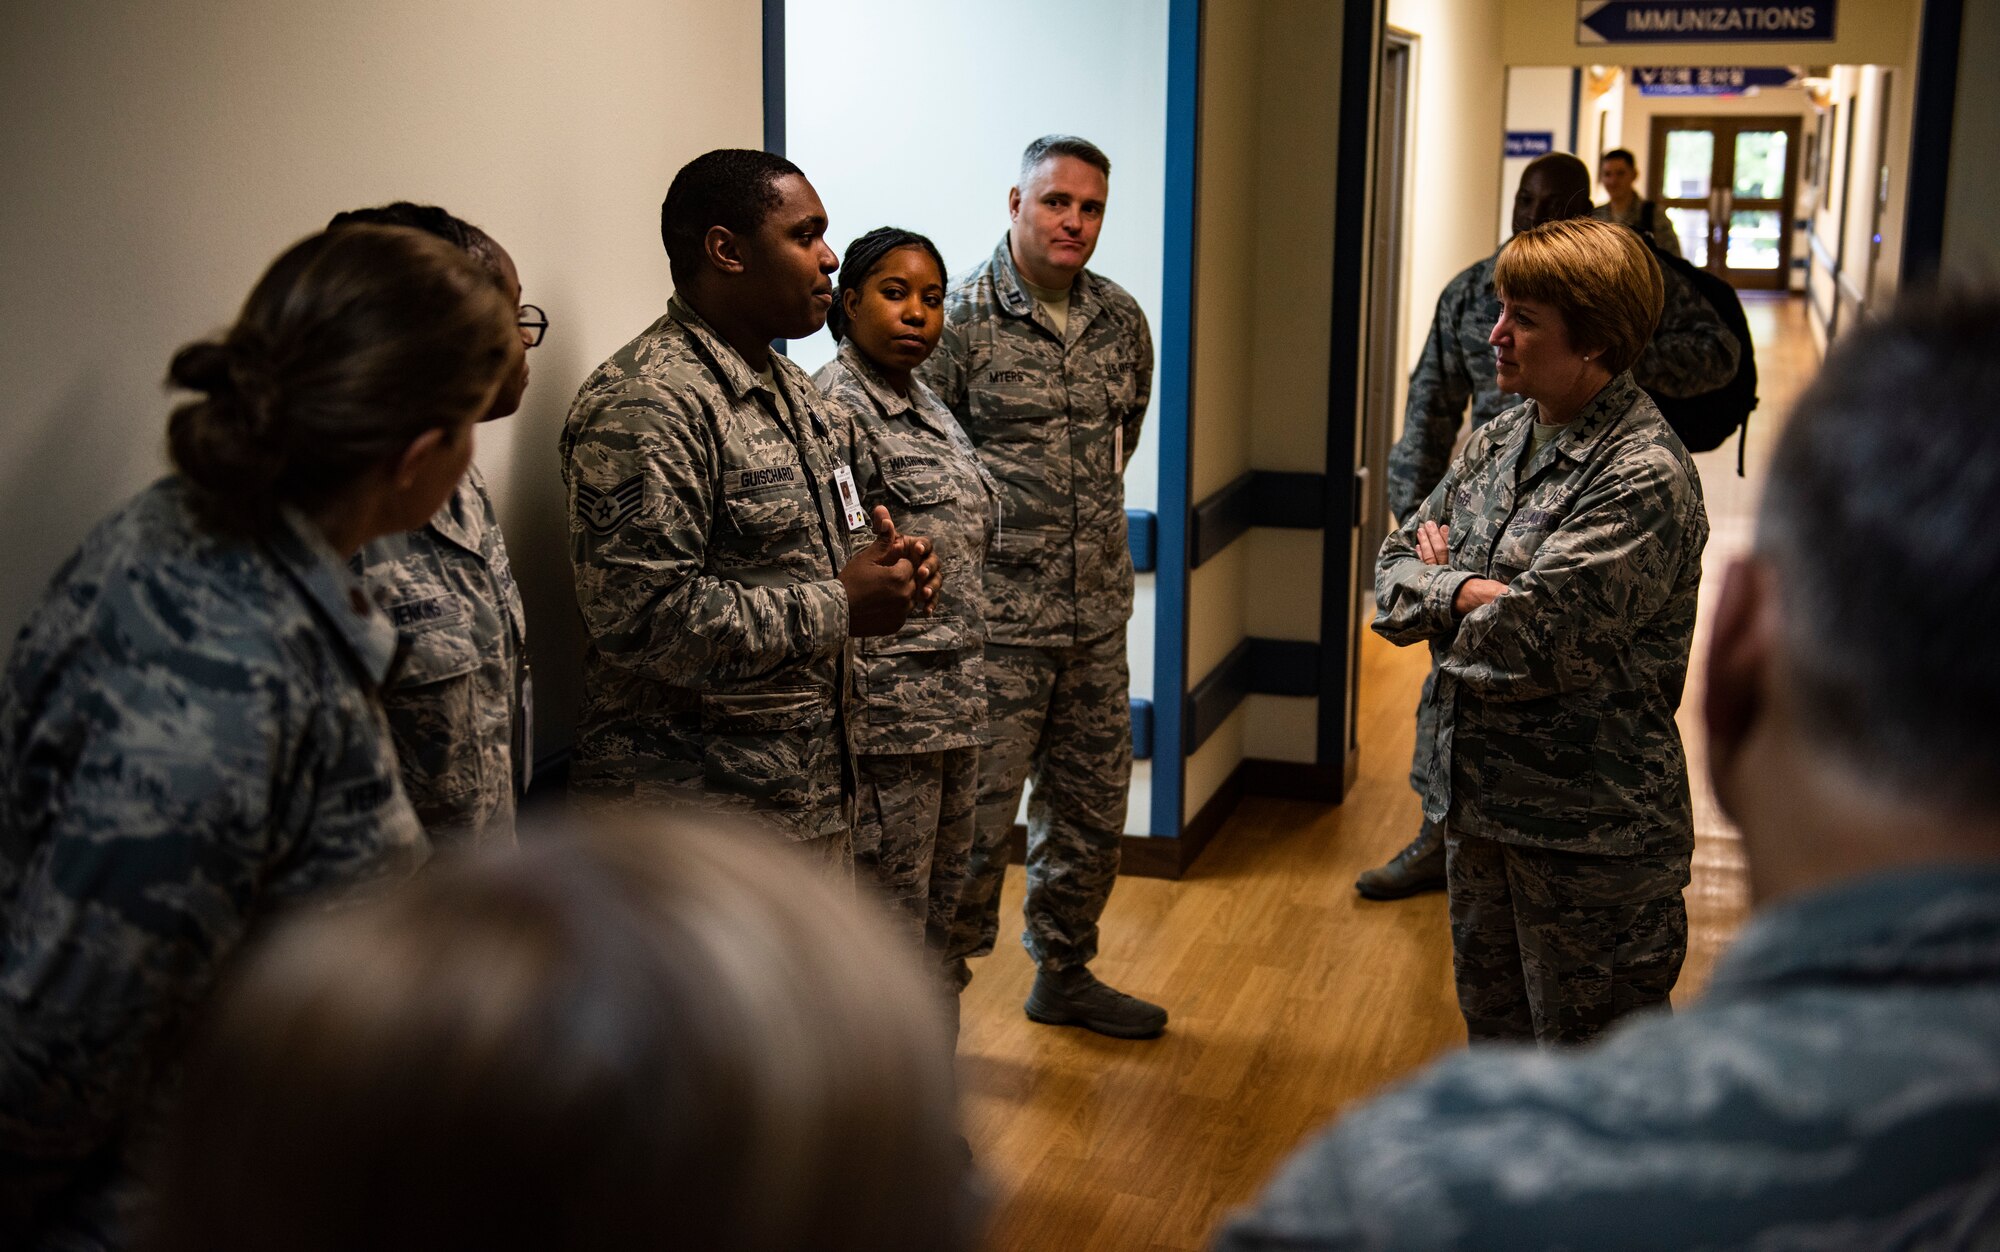 U.S. Air Force Lt. Gen. Dorothy Hogg, Air Force Surgeon General, converses with 8th Medical Group staff during her visit to Kunsan Air Base, Republic of Korea, Sept. 25, 2018. The 8th MDG showcased their capabilities and highlighted their staff during Hogg’s visit. (U.S. Air Force photo by Senior Airman Stefan Alvarez)